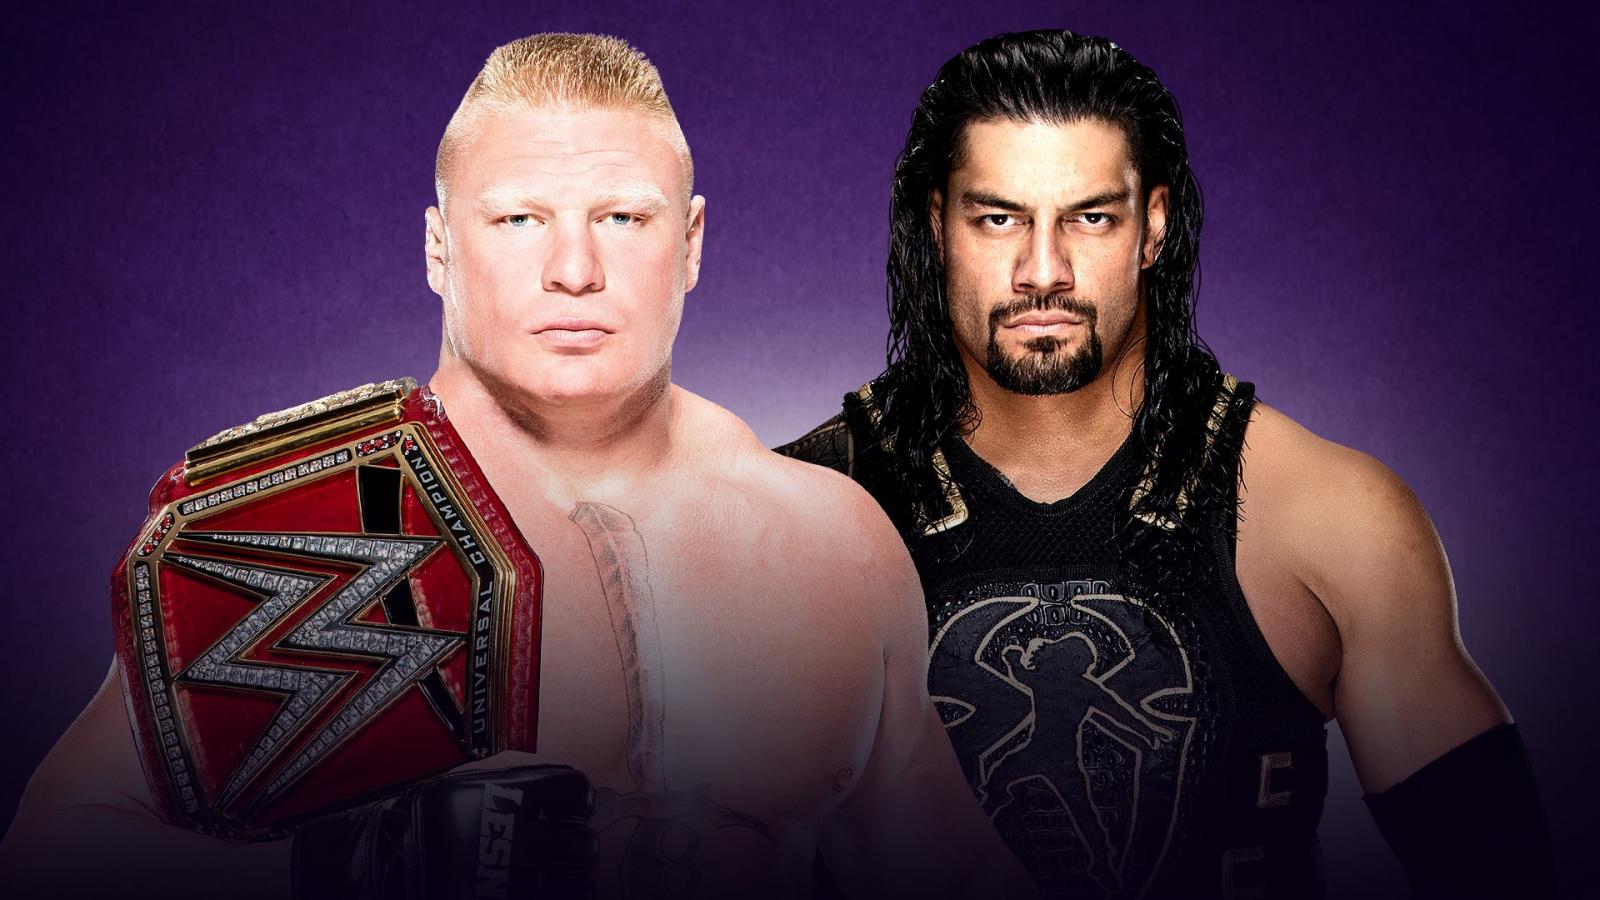 Low-Key WrestleMania Matches That Could Steal The Show